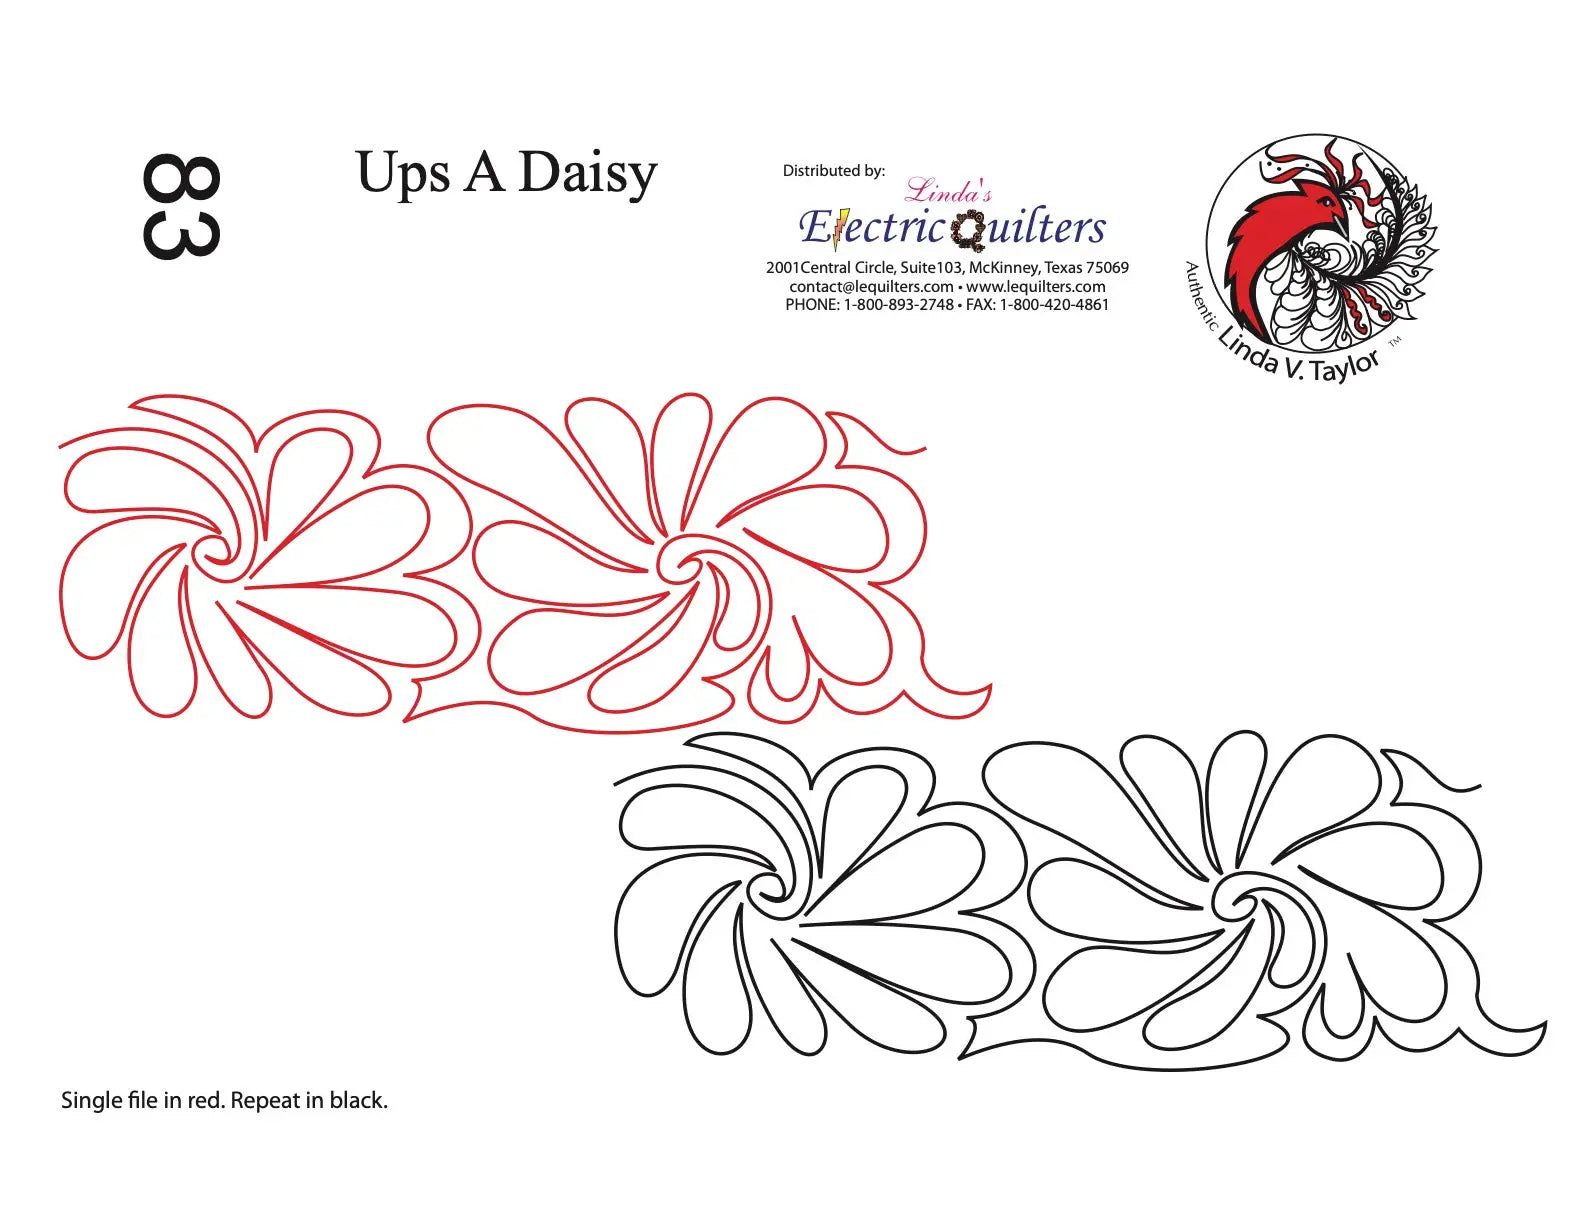 083 Ups A Daisy Pantograph by Linda V. Taylor - Linda's Electric Quilters